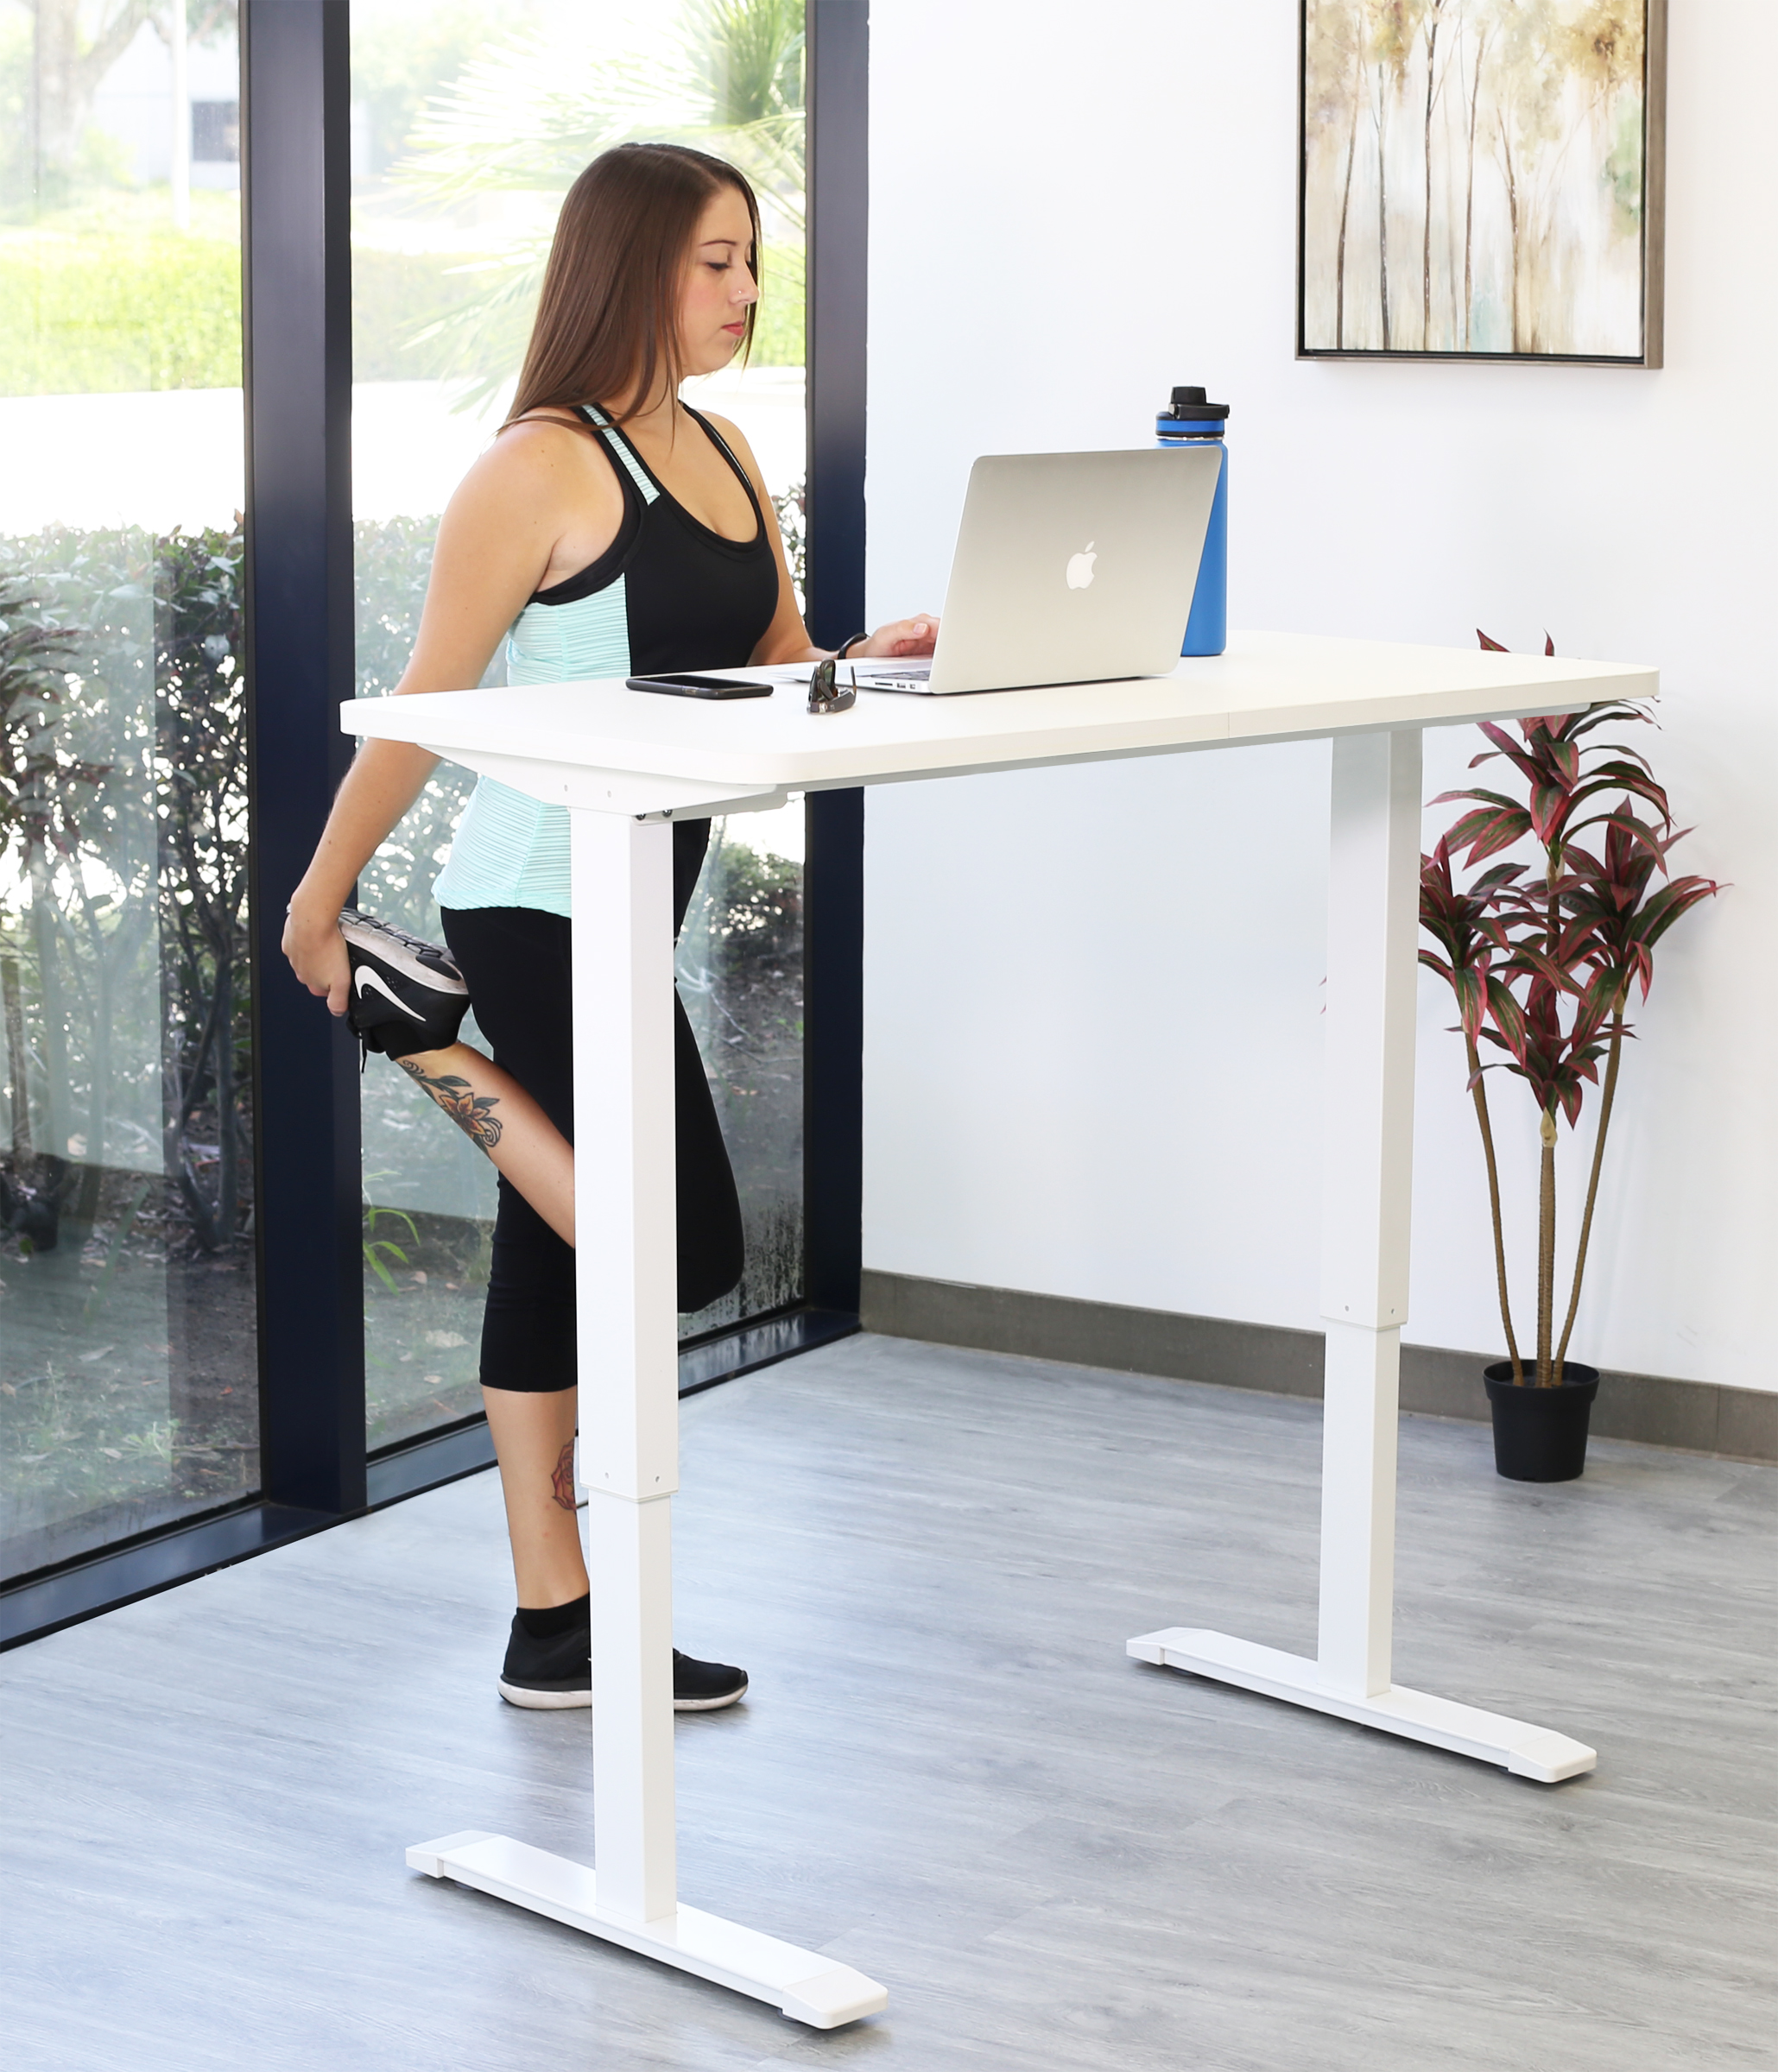 Motionwise White Electric Height Adjustable Standing Desk, 24”x48", Height Adjustable 28"-48" with 4 pre-set height adjustments and USB Charge Port, Multiple Colors - image 4 of 14